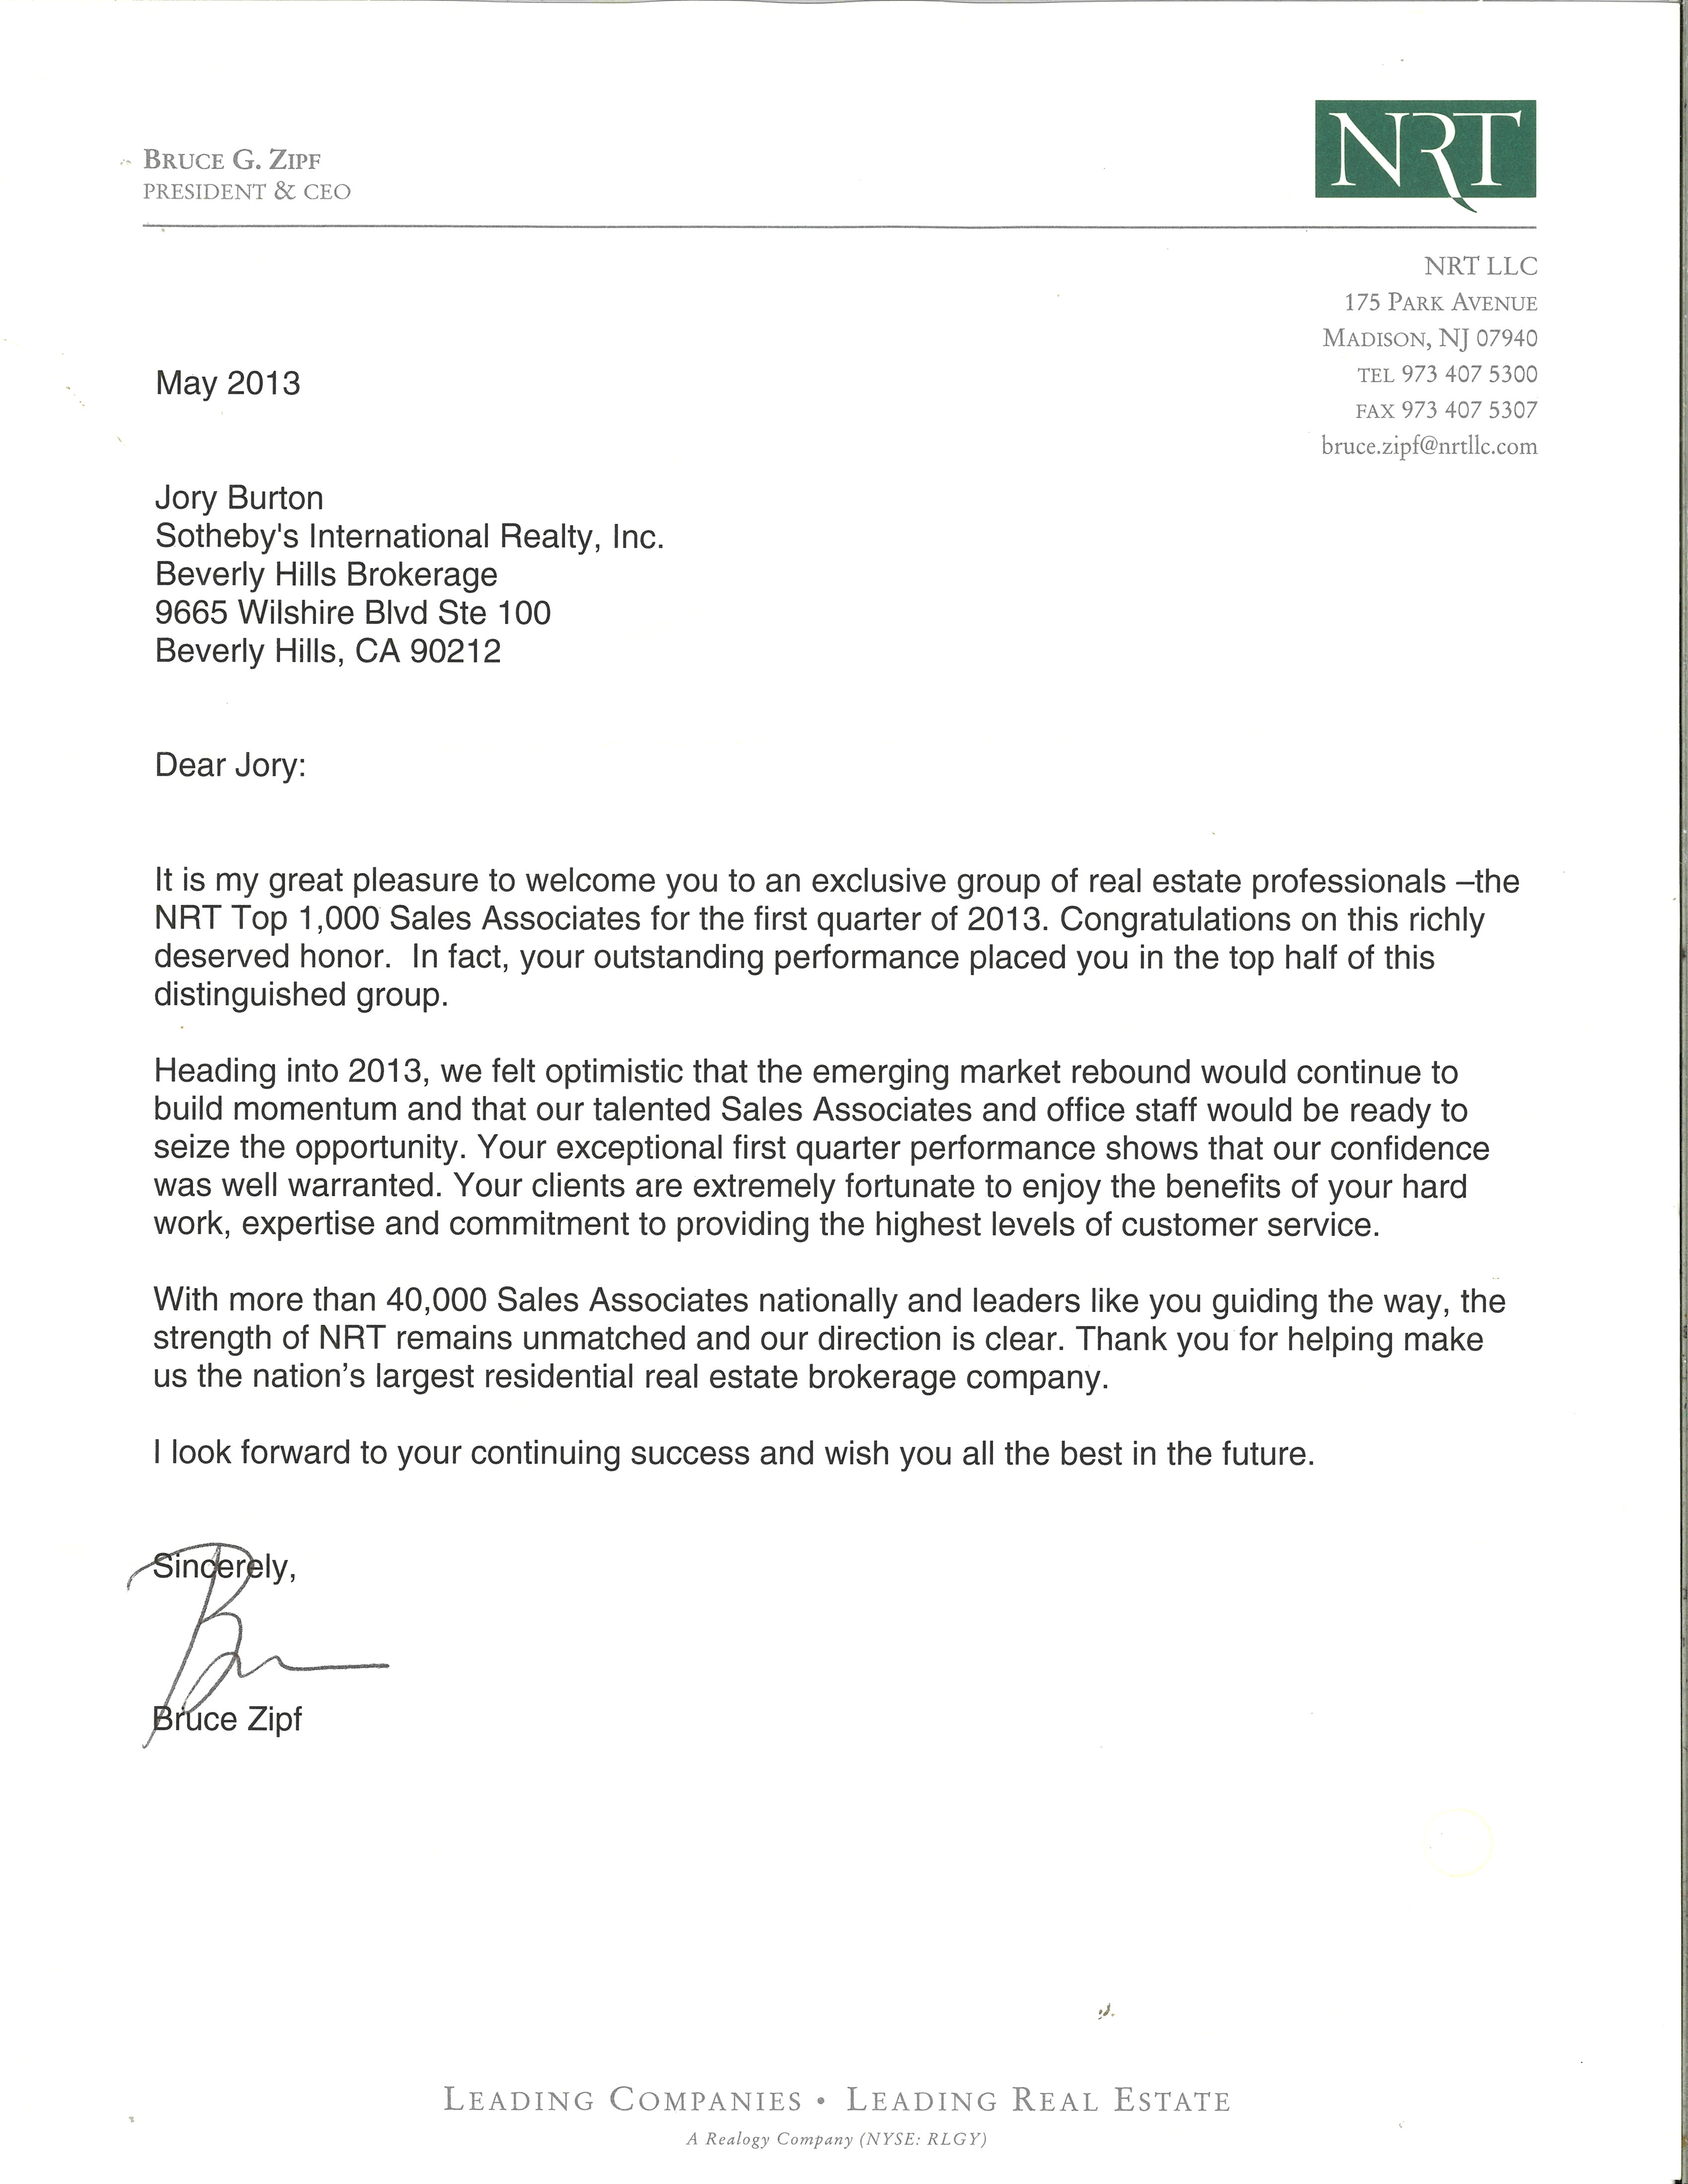 Letter of recognition for being in the top 500 agents nationwide